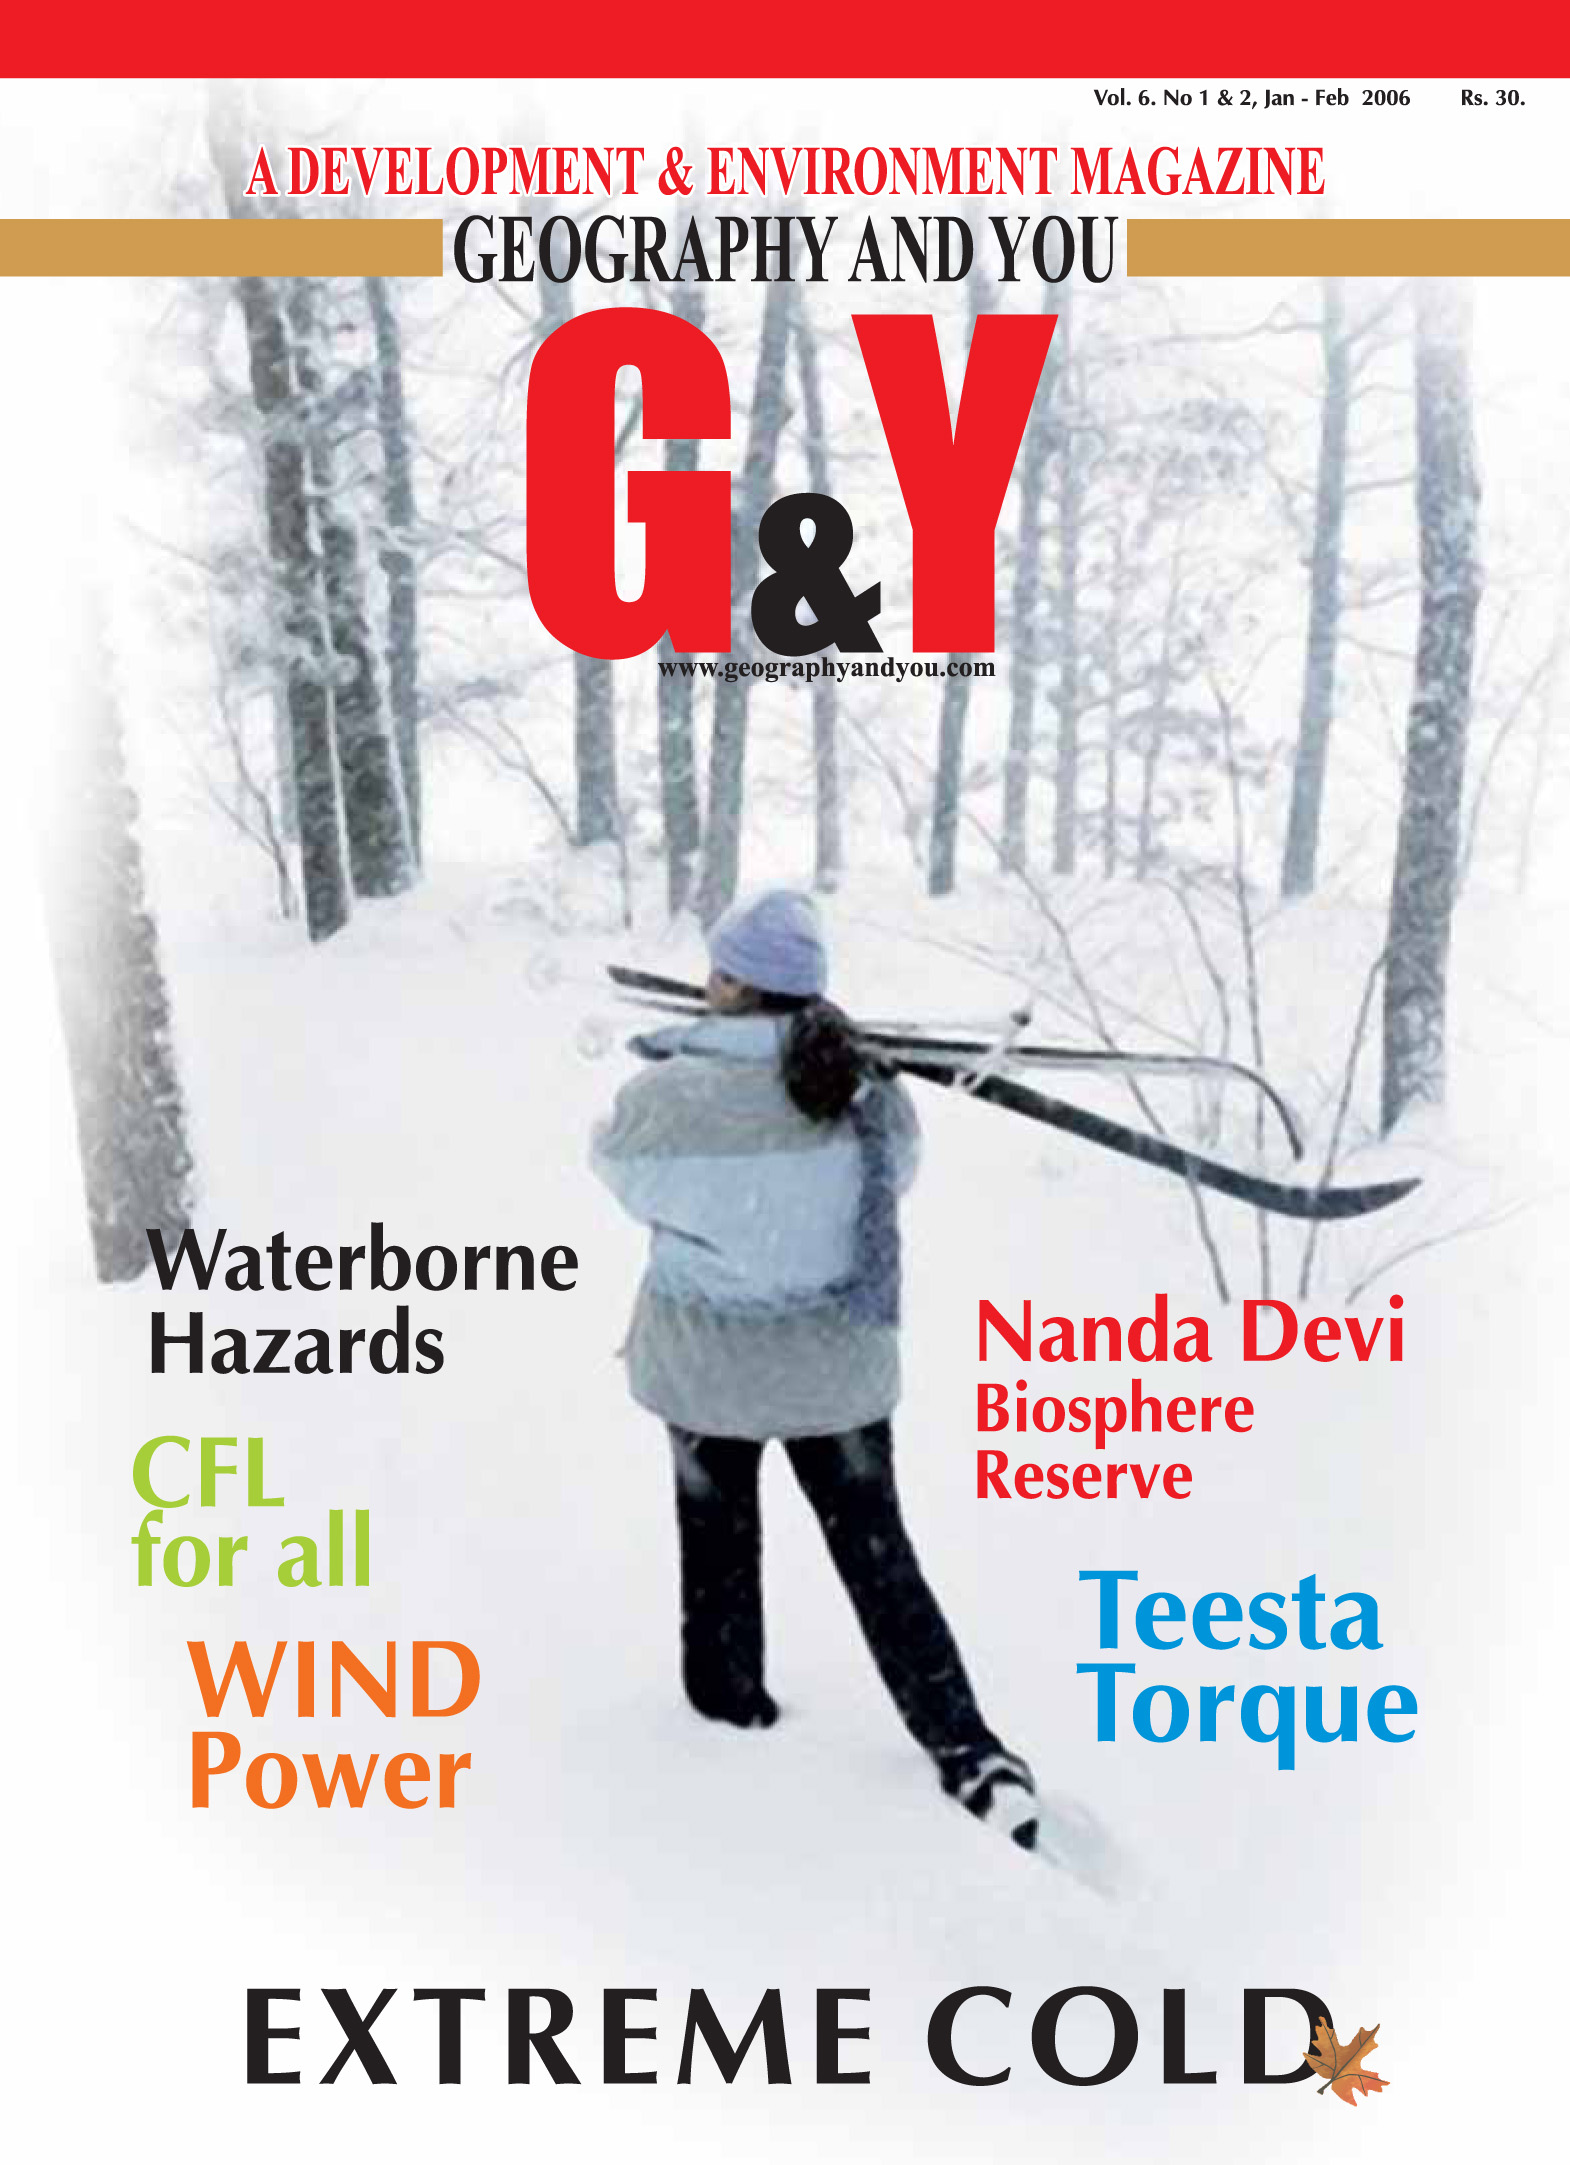 Extreme Cold (Jan-Feb 2006) cover